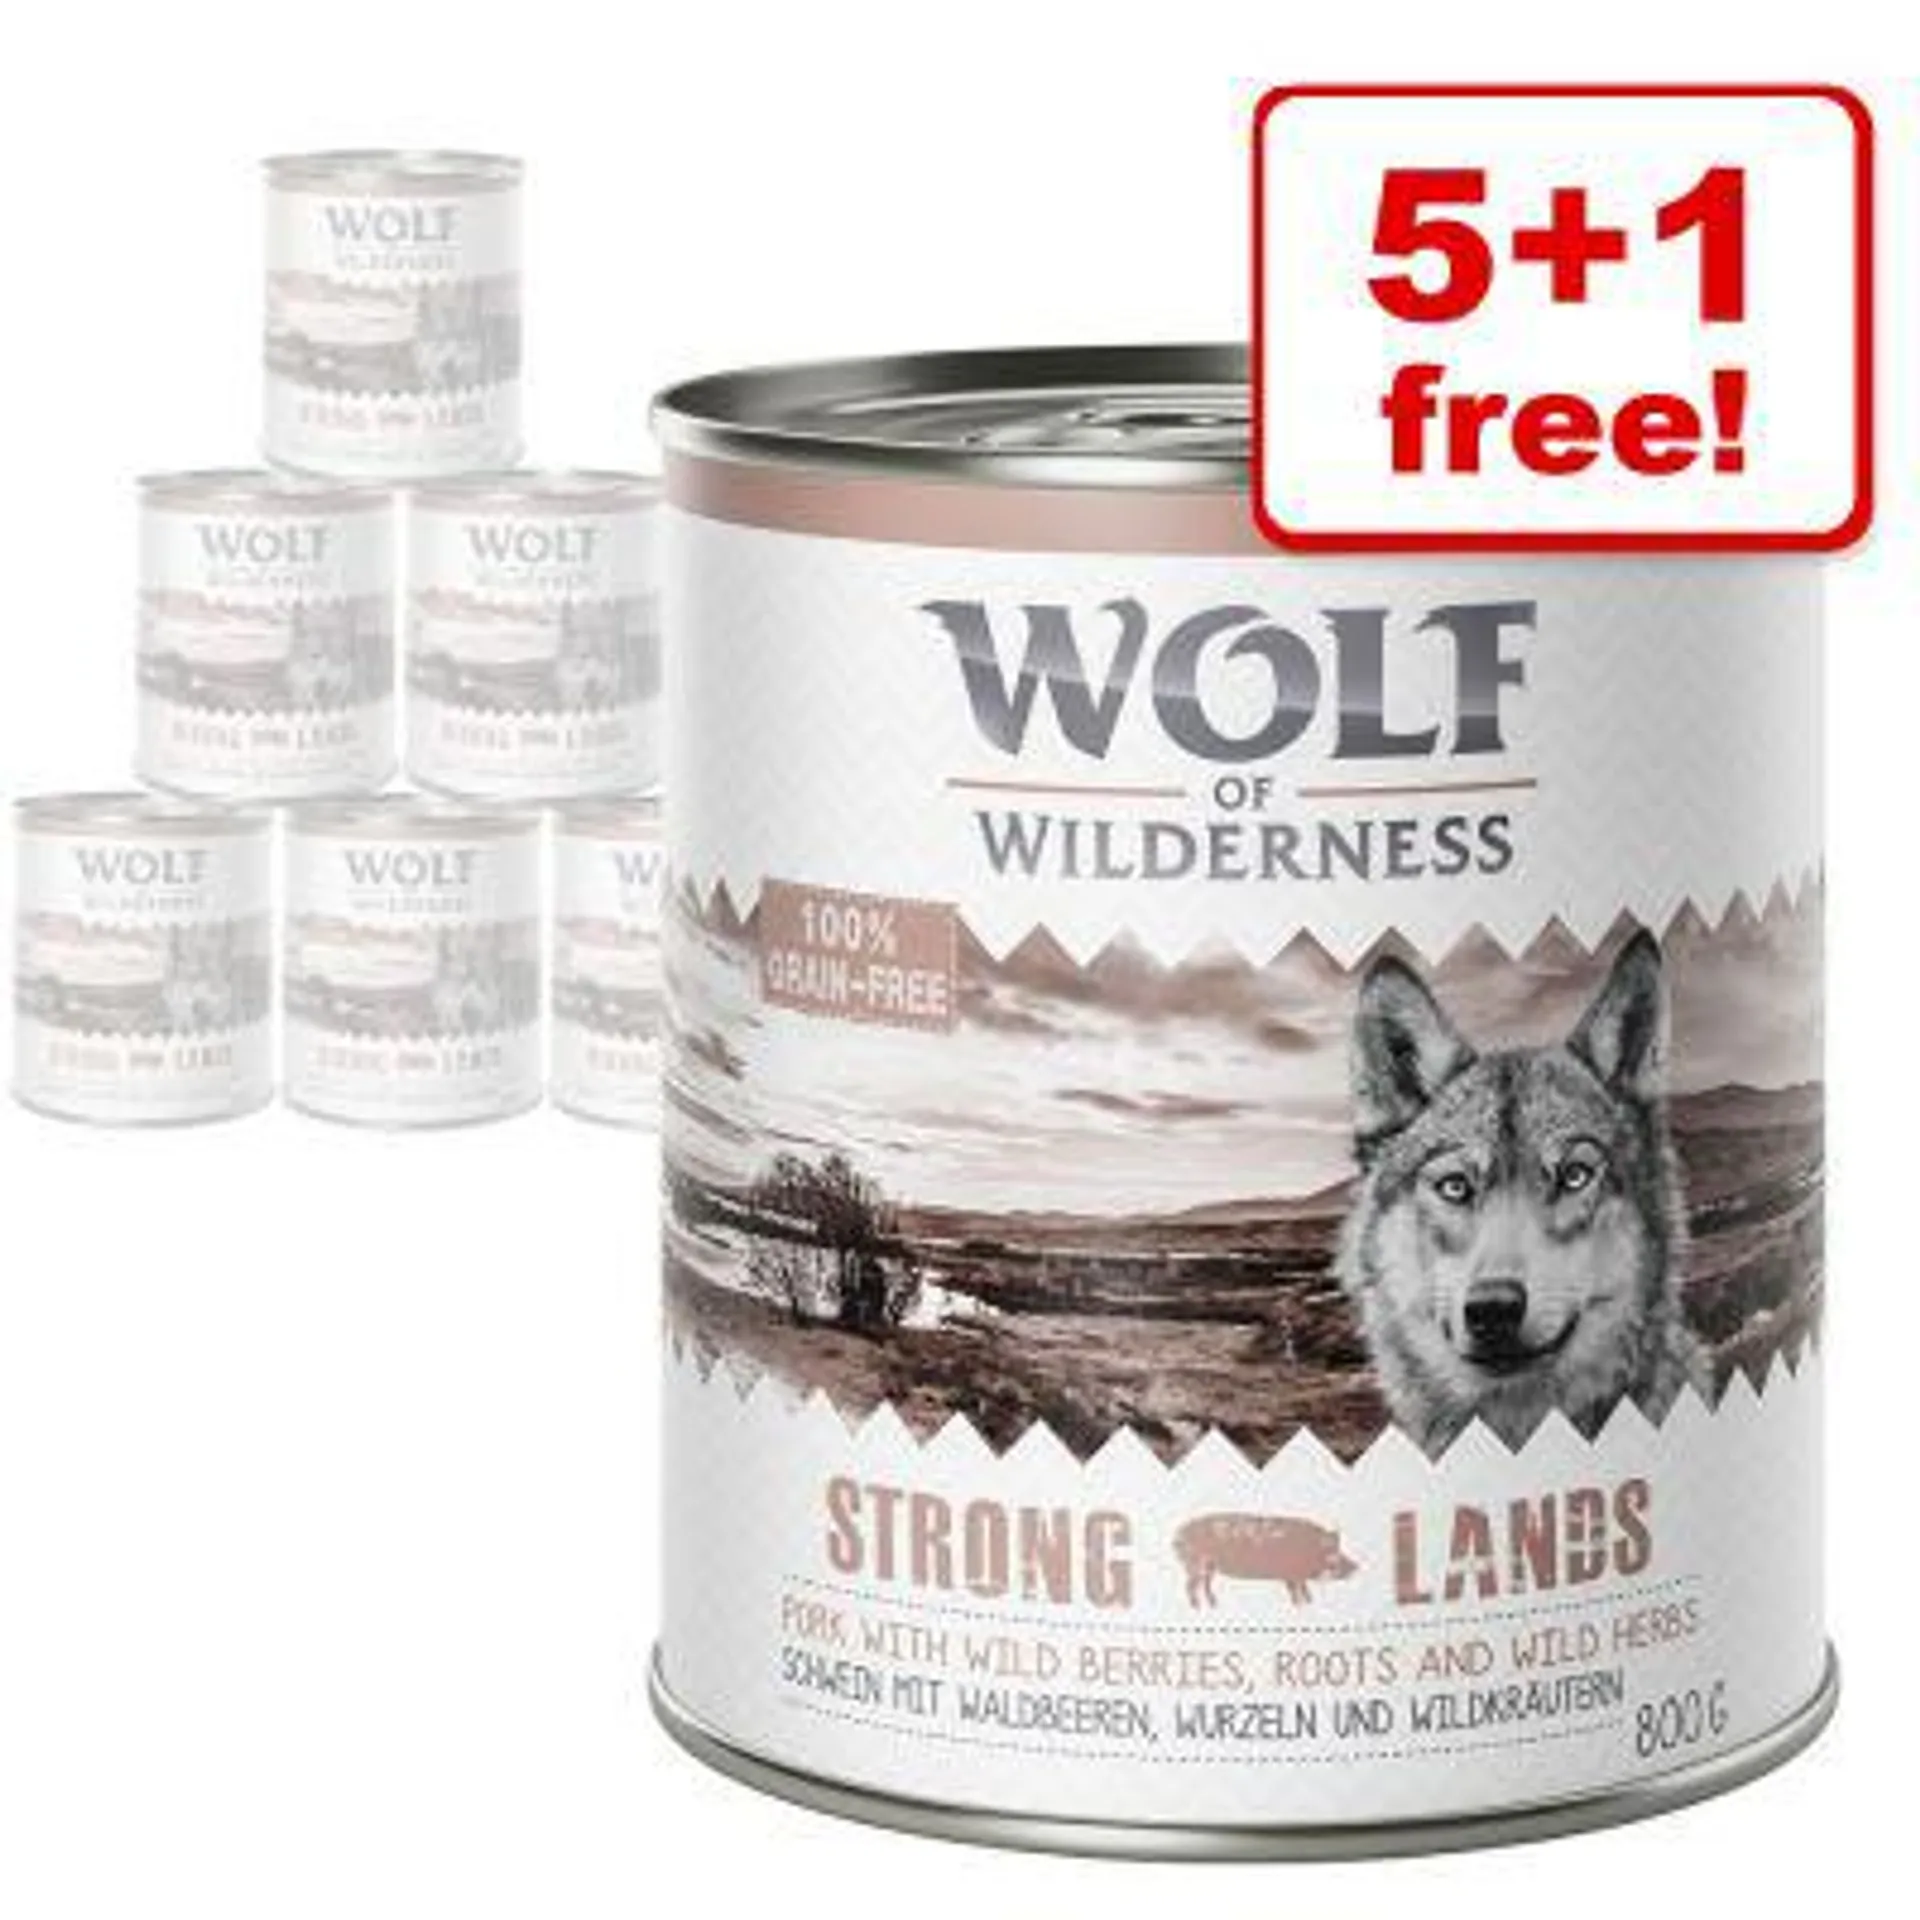 6 x 800g Wolf of Wilderness Classic Wet Dog Food - 5 + 1 Free!*